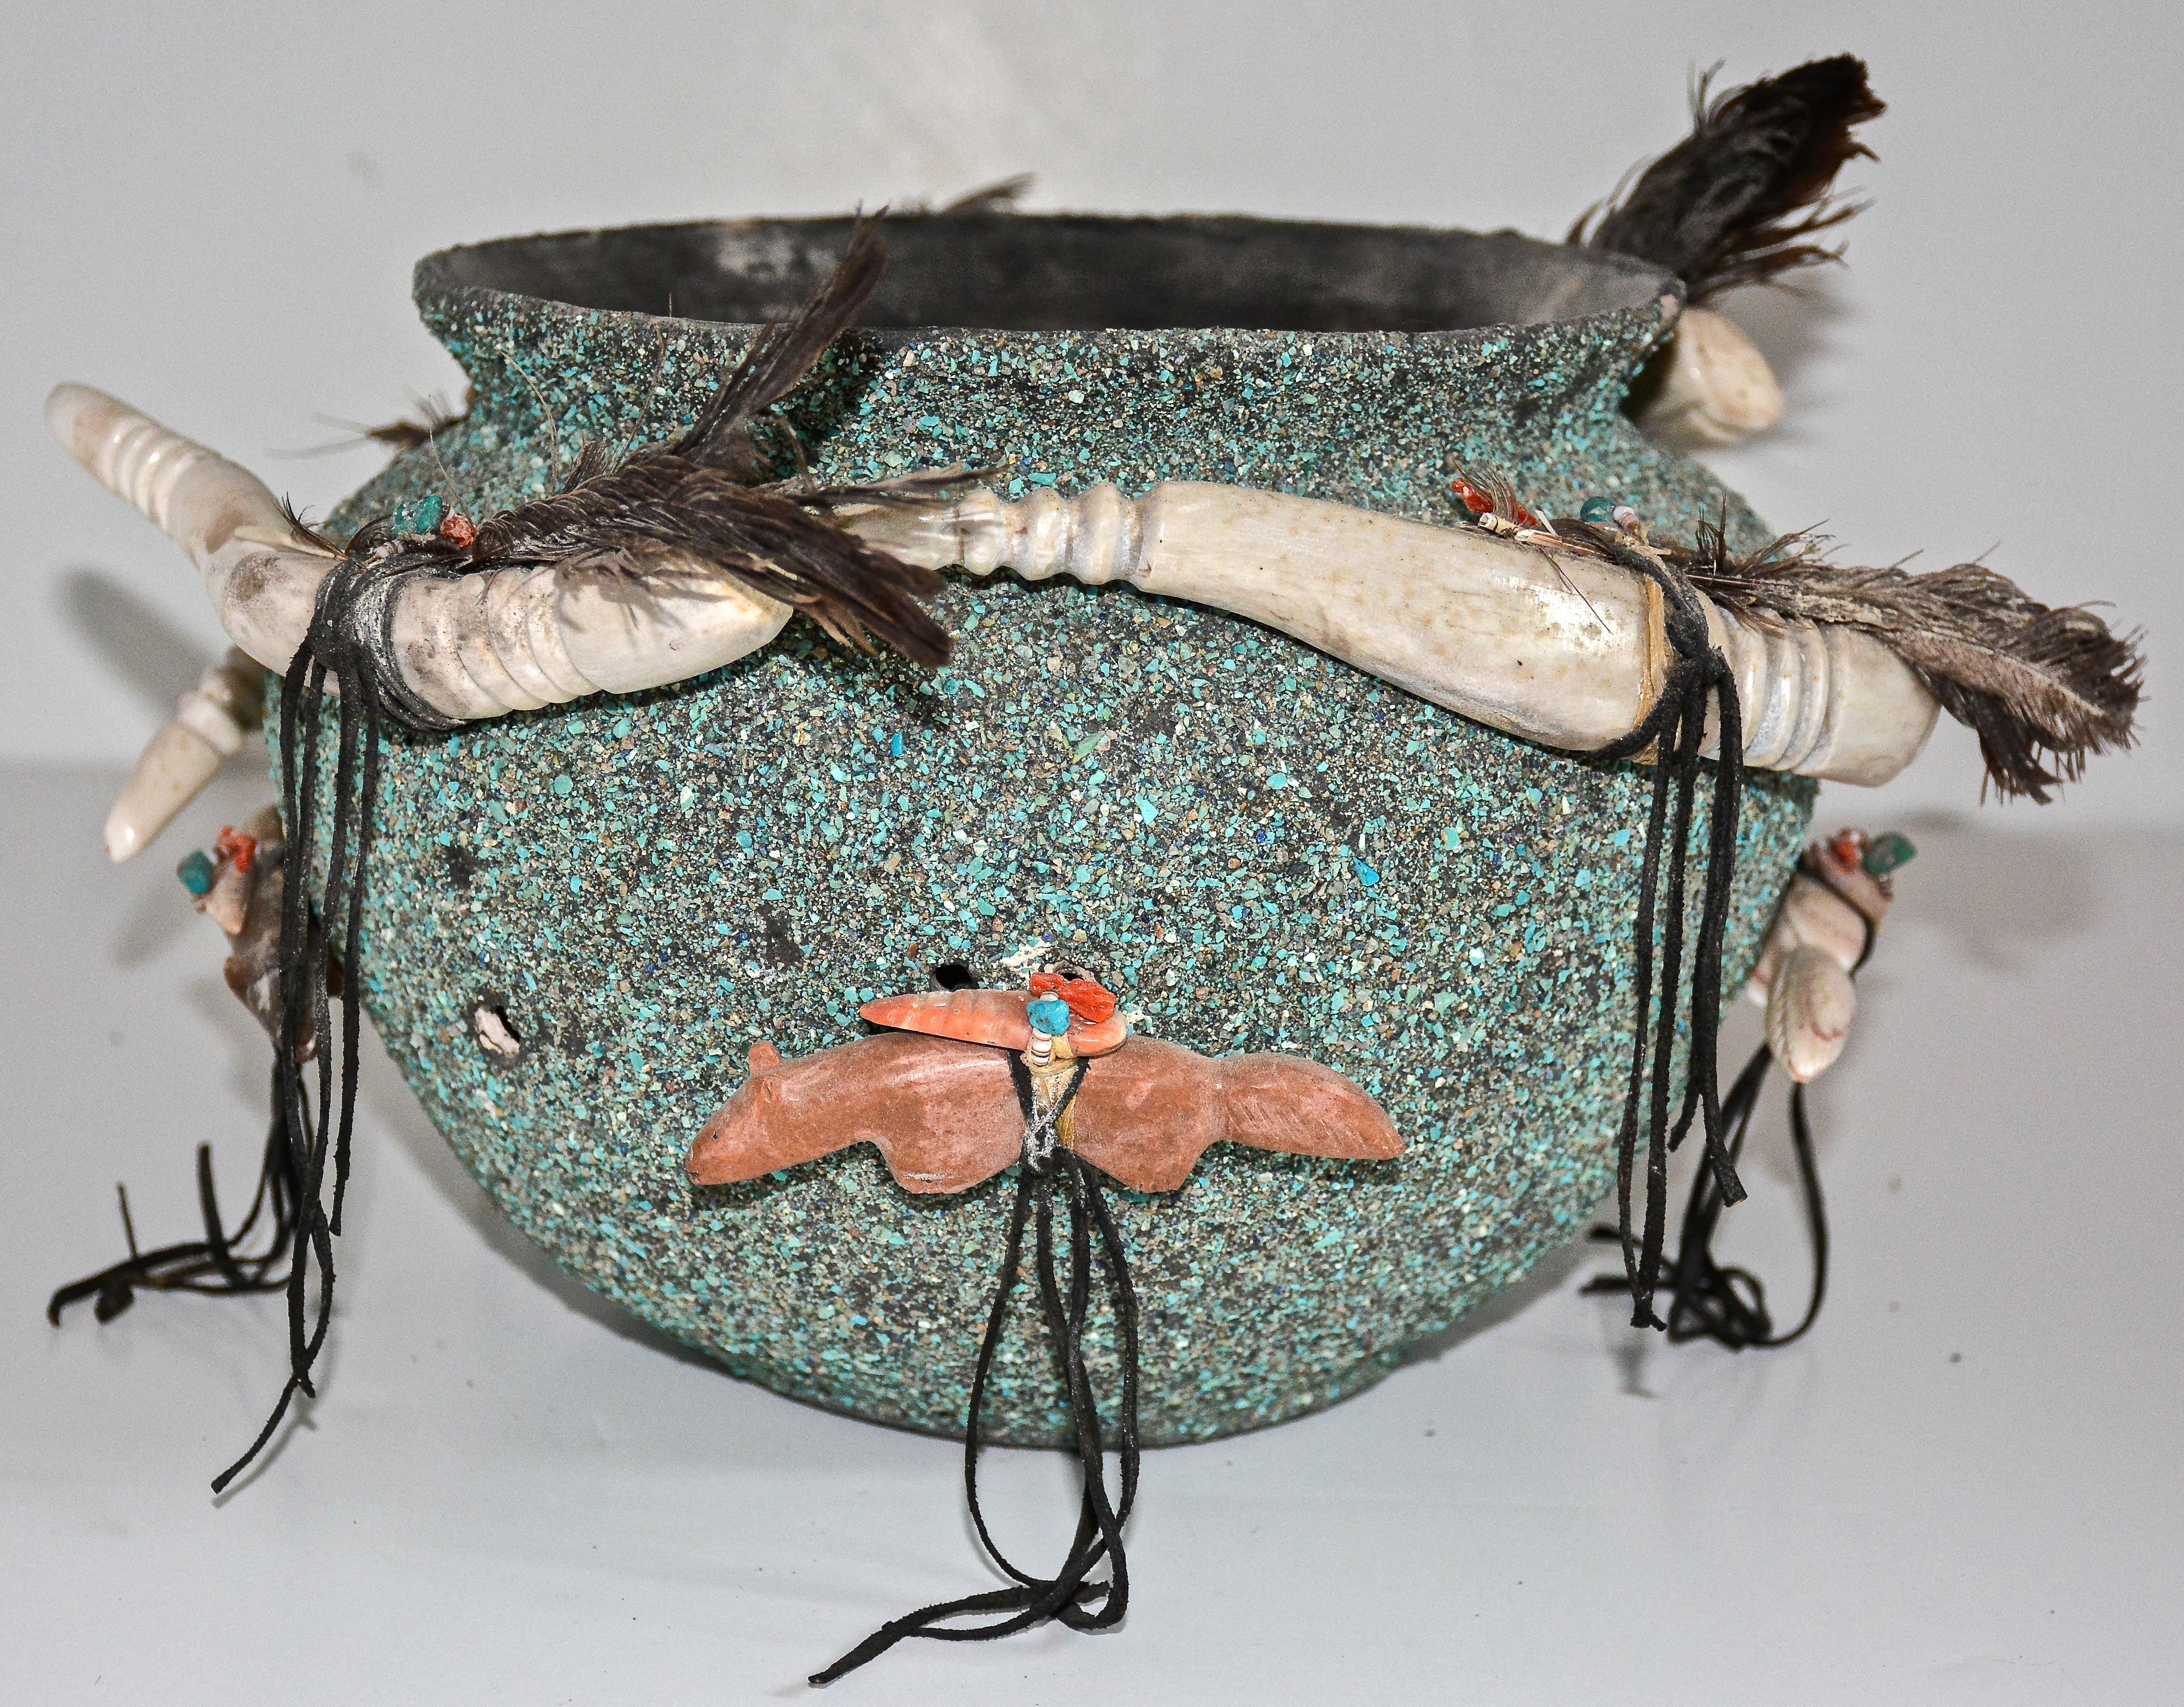 Zuni Fetish Bowl
1976
Edna Weahkee Leki ( 1924 - 2003 )
Ceramic pot, pine tar, turquoise, azurite, serpentine, travertine, alabaster, spiny oyster shell, coral, deer antlers, feathers, deer sinew, leather, cornmeal, ash.

This truly exceptional Edna